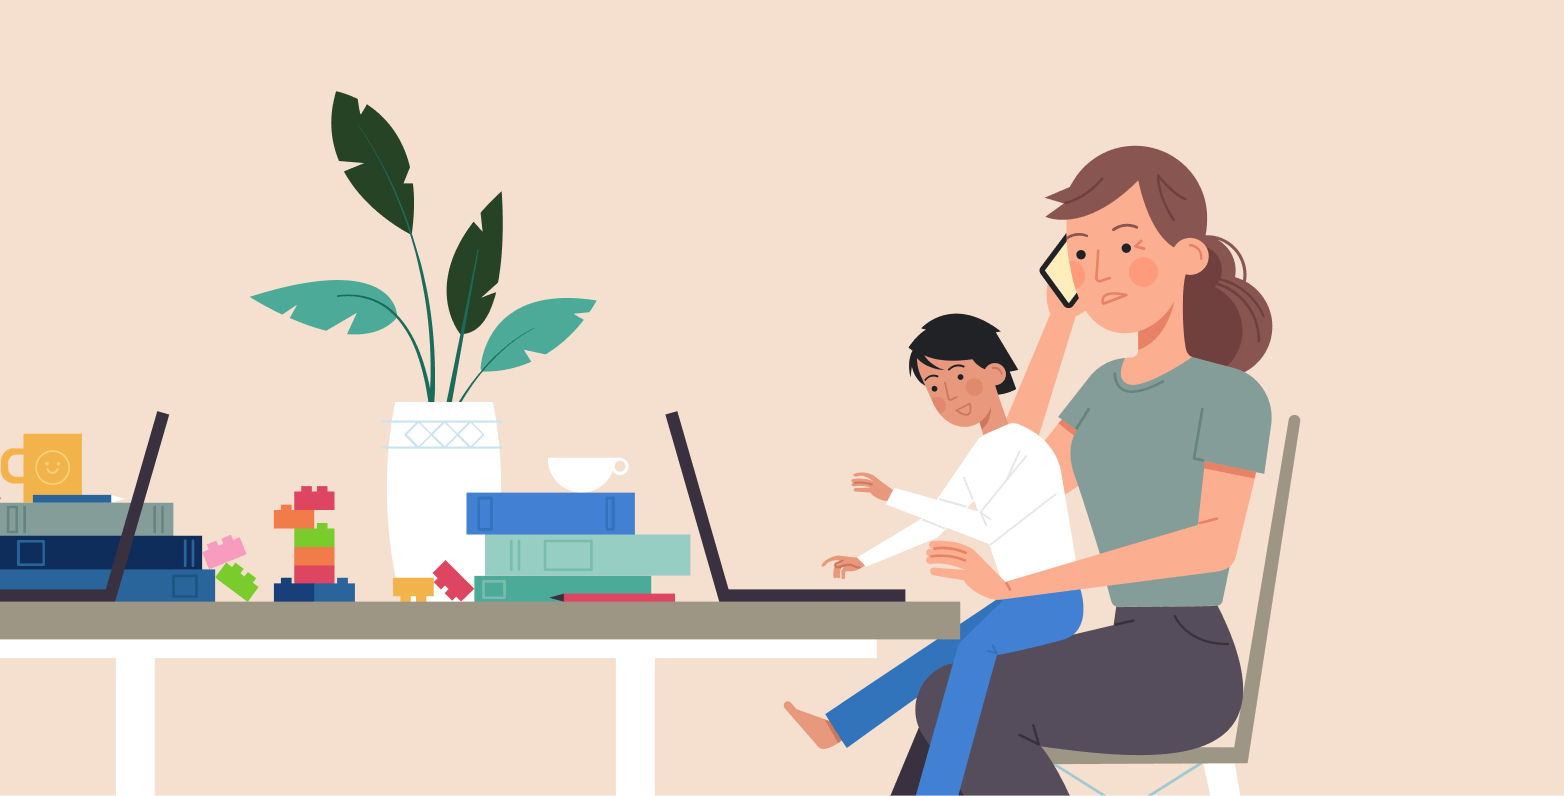 Illustration of a woman on the phone with a child on her lap.